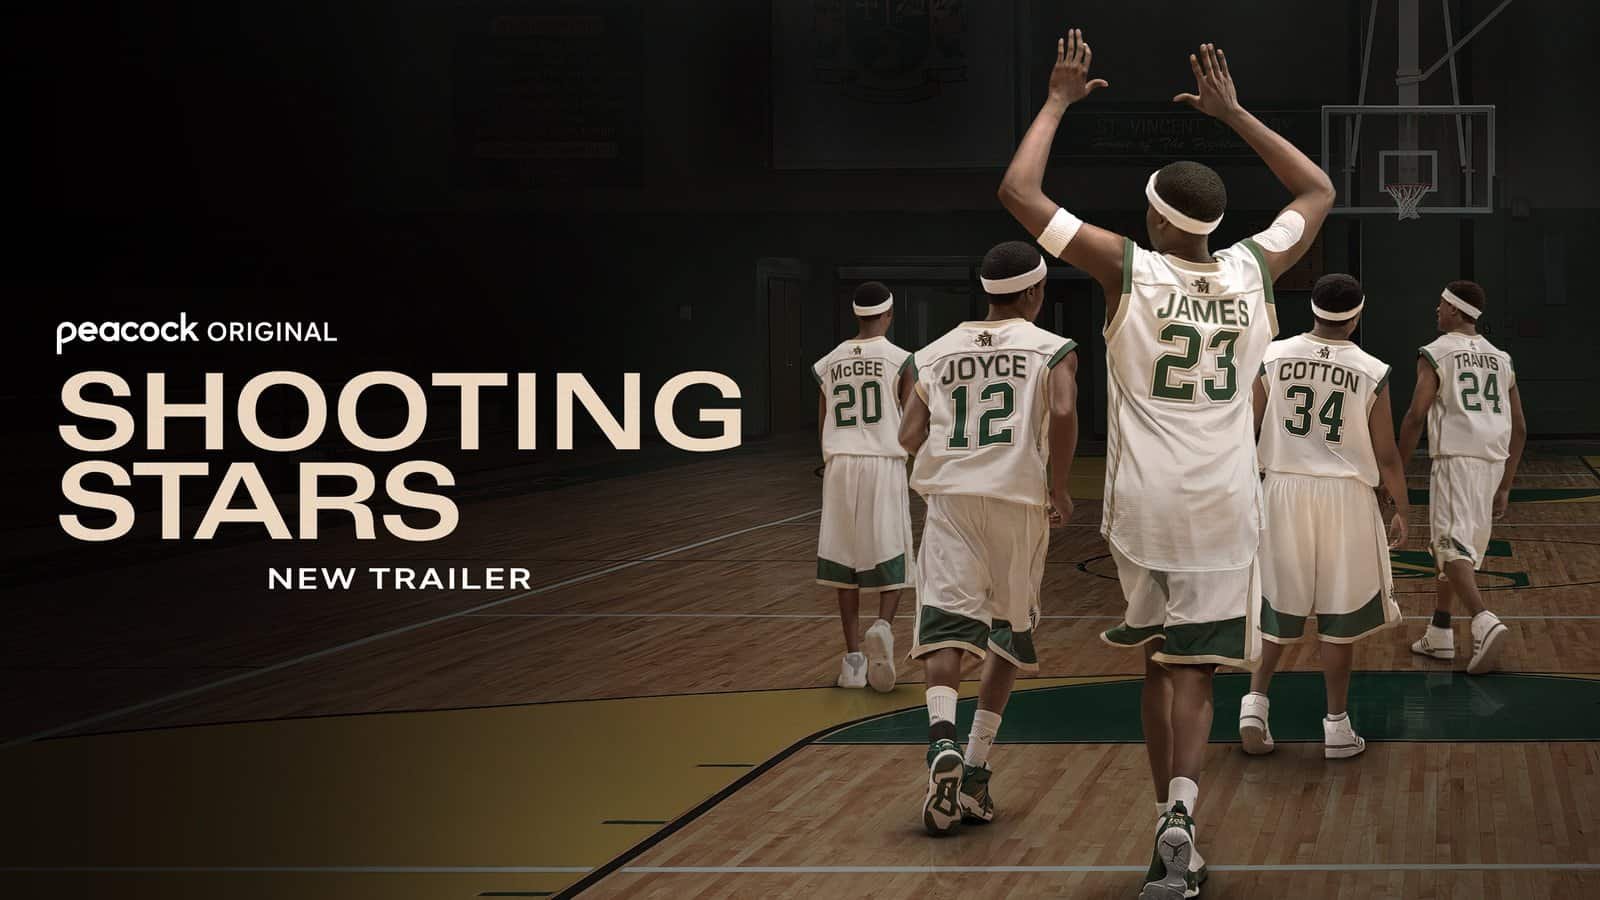 SHOOTING STARS | Watch the New Trailer